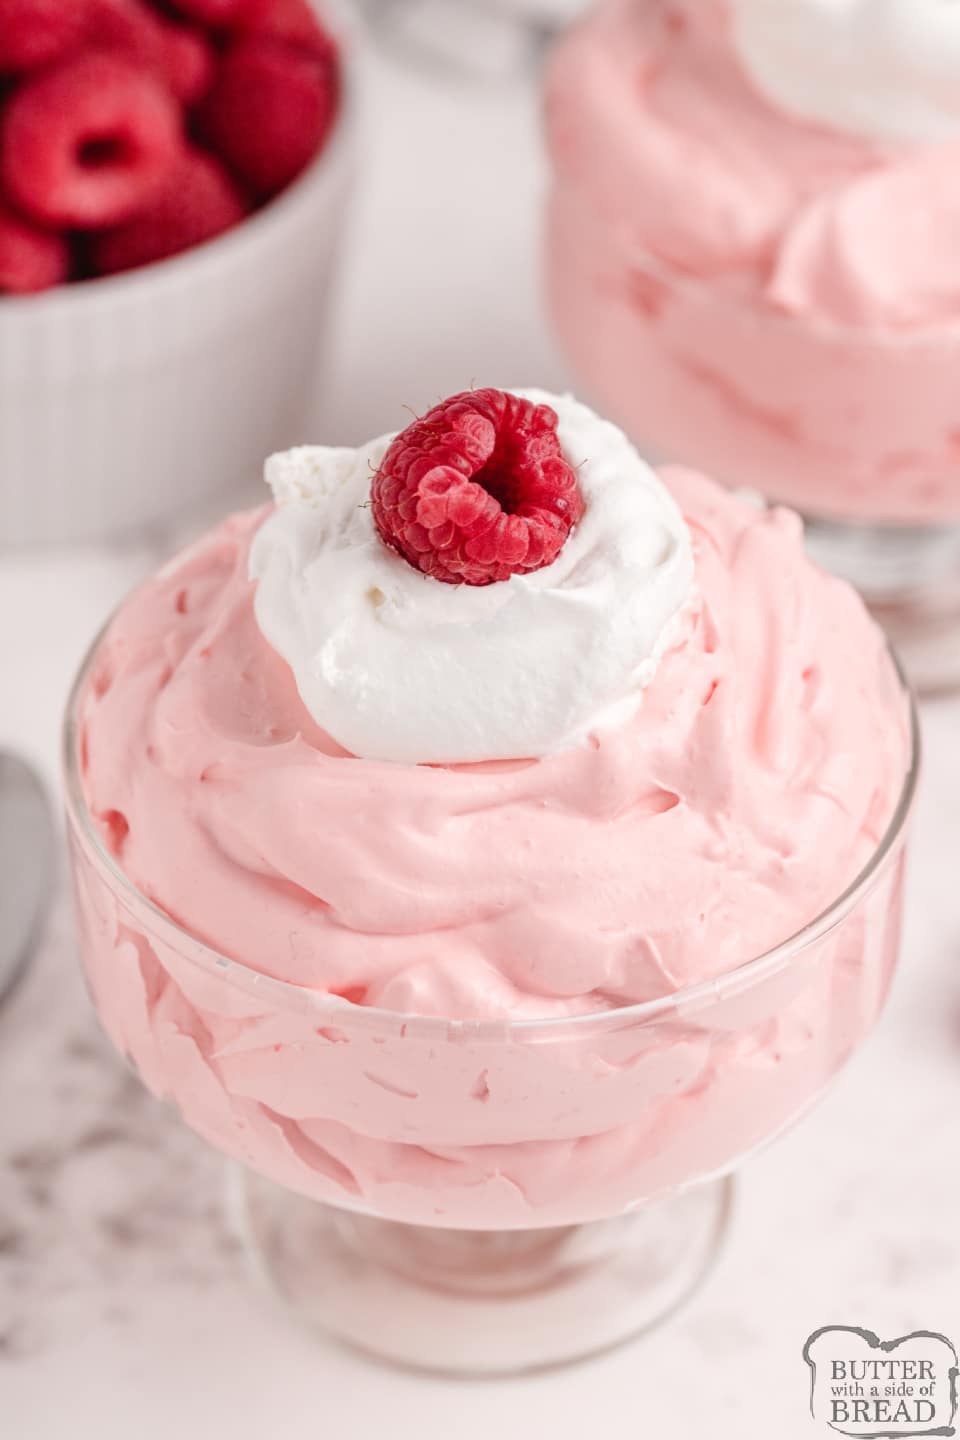 Creamy Raspberry Jello made with just 3 ingredients! Easy Jello recipe made with jello, vanilla pudding and whipped topping for a simple and delicious dessert.